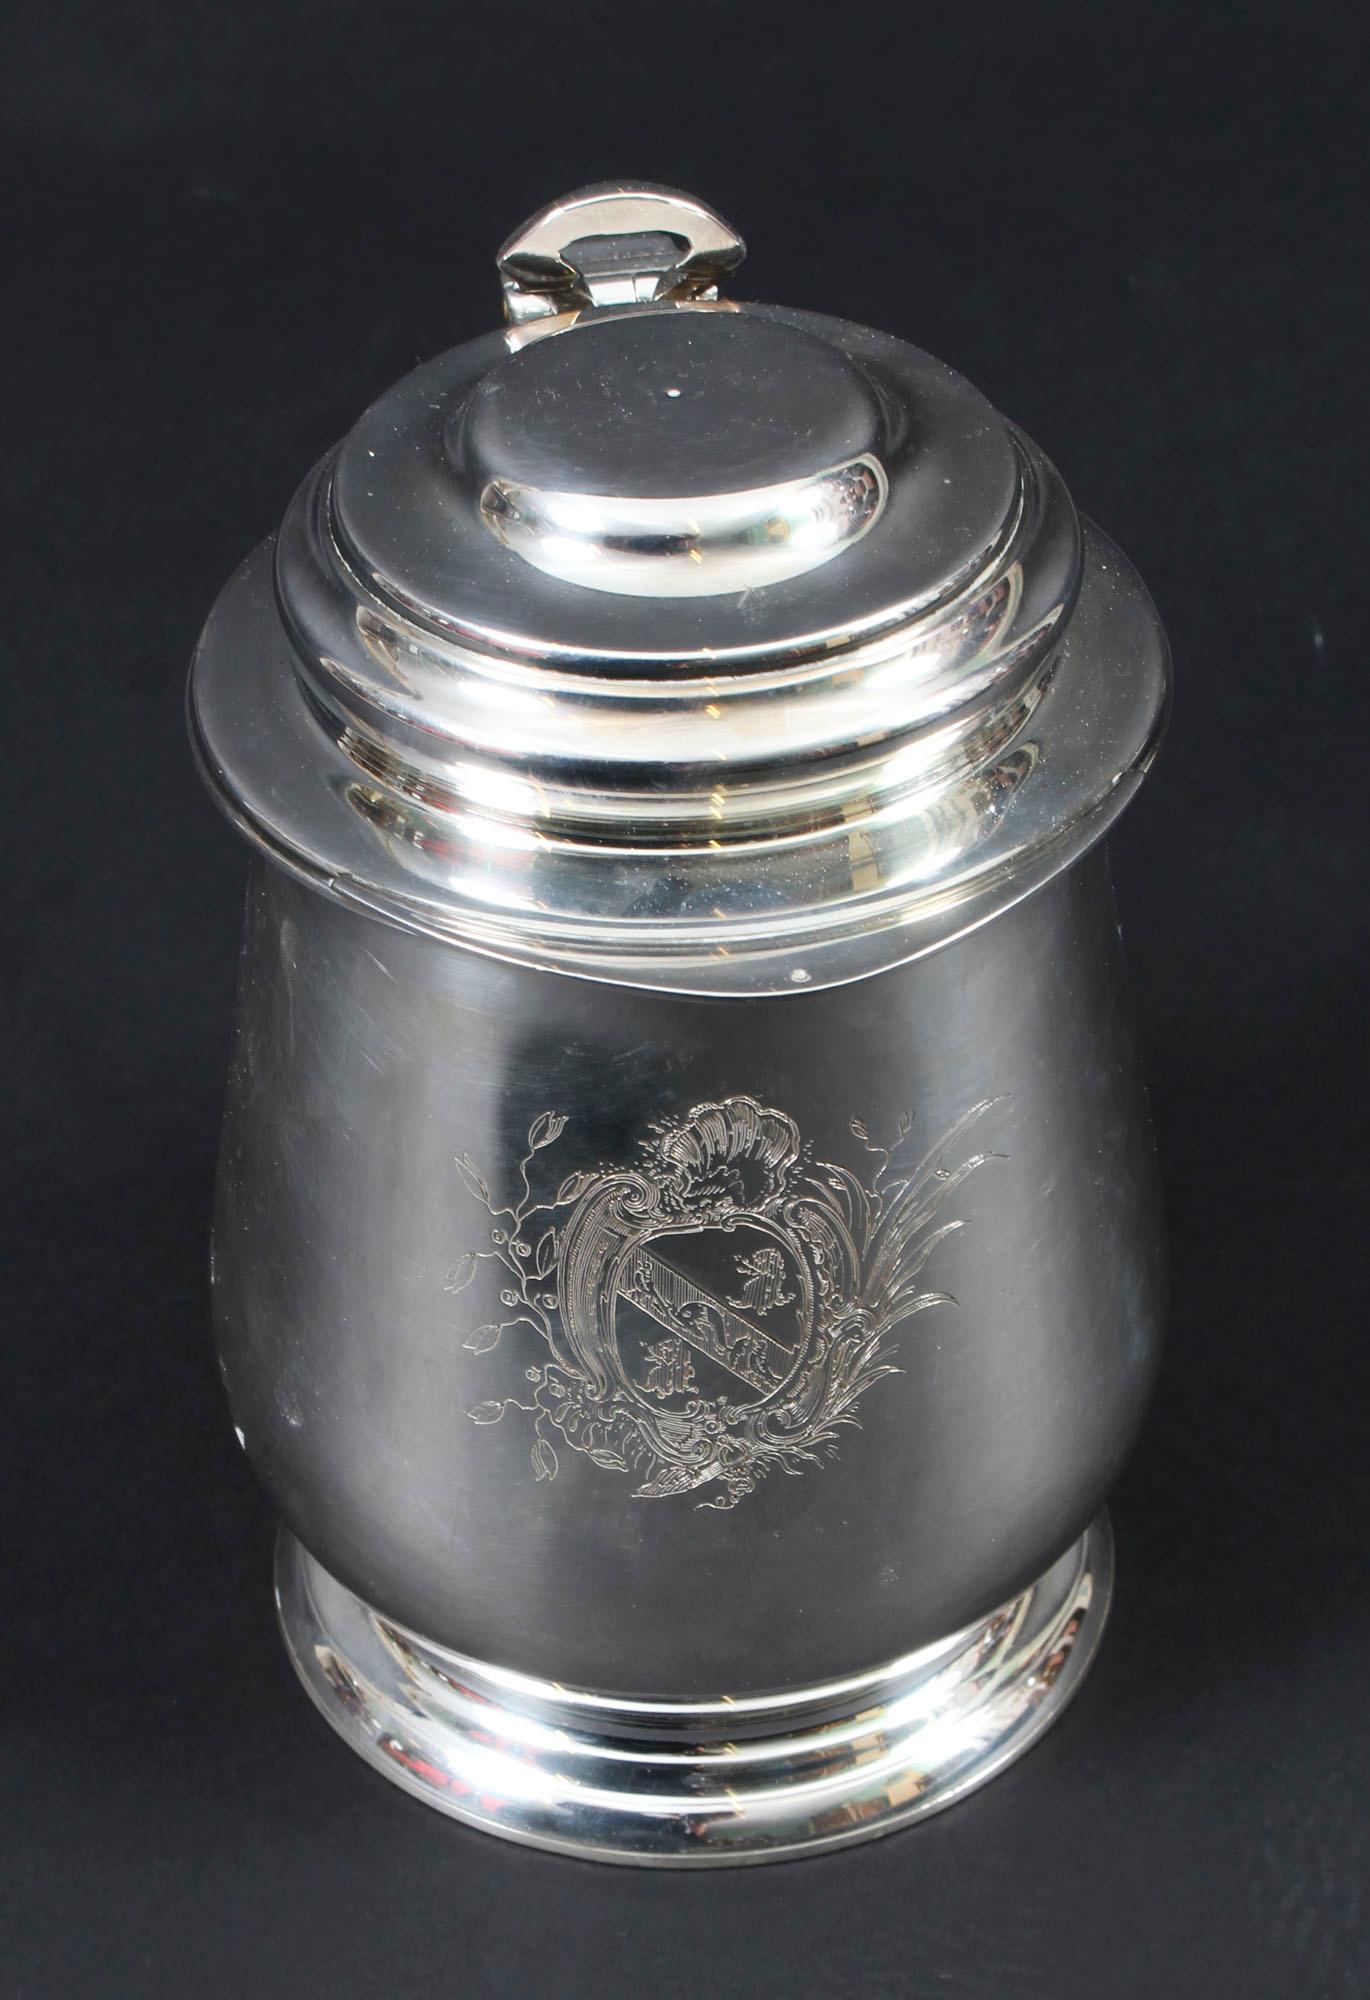 A vintage silver plated copy of Benjamin Franklin's tankard made by the renowned Philadelphia silversmith, Elias Boudinet in celebration of the Bicentennial in 1978

The original tankard, dating to 1760, is on display at the Franklin Institute in